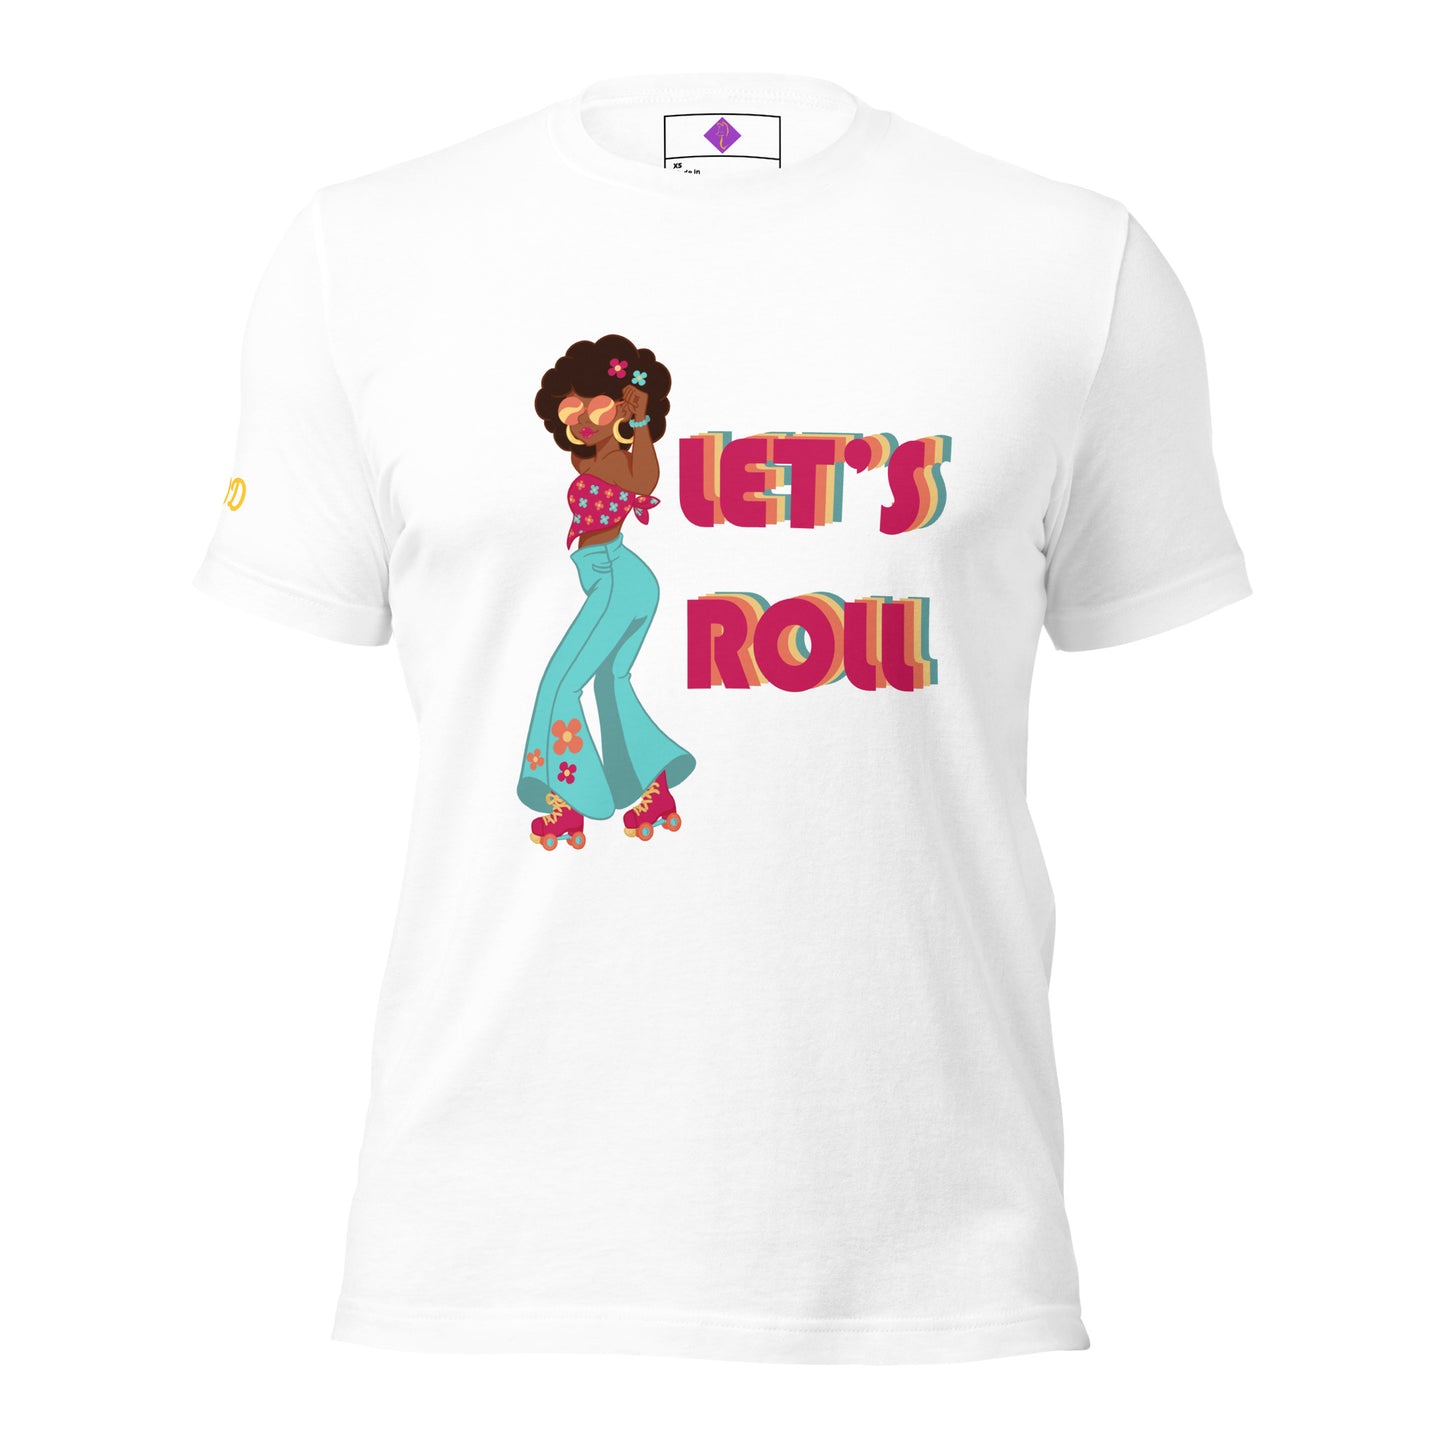 Let's Roll t-shirt